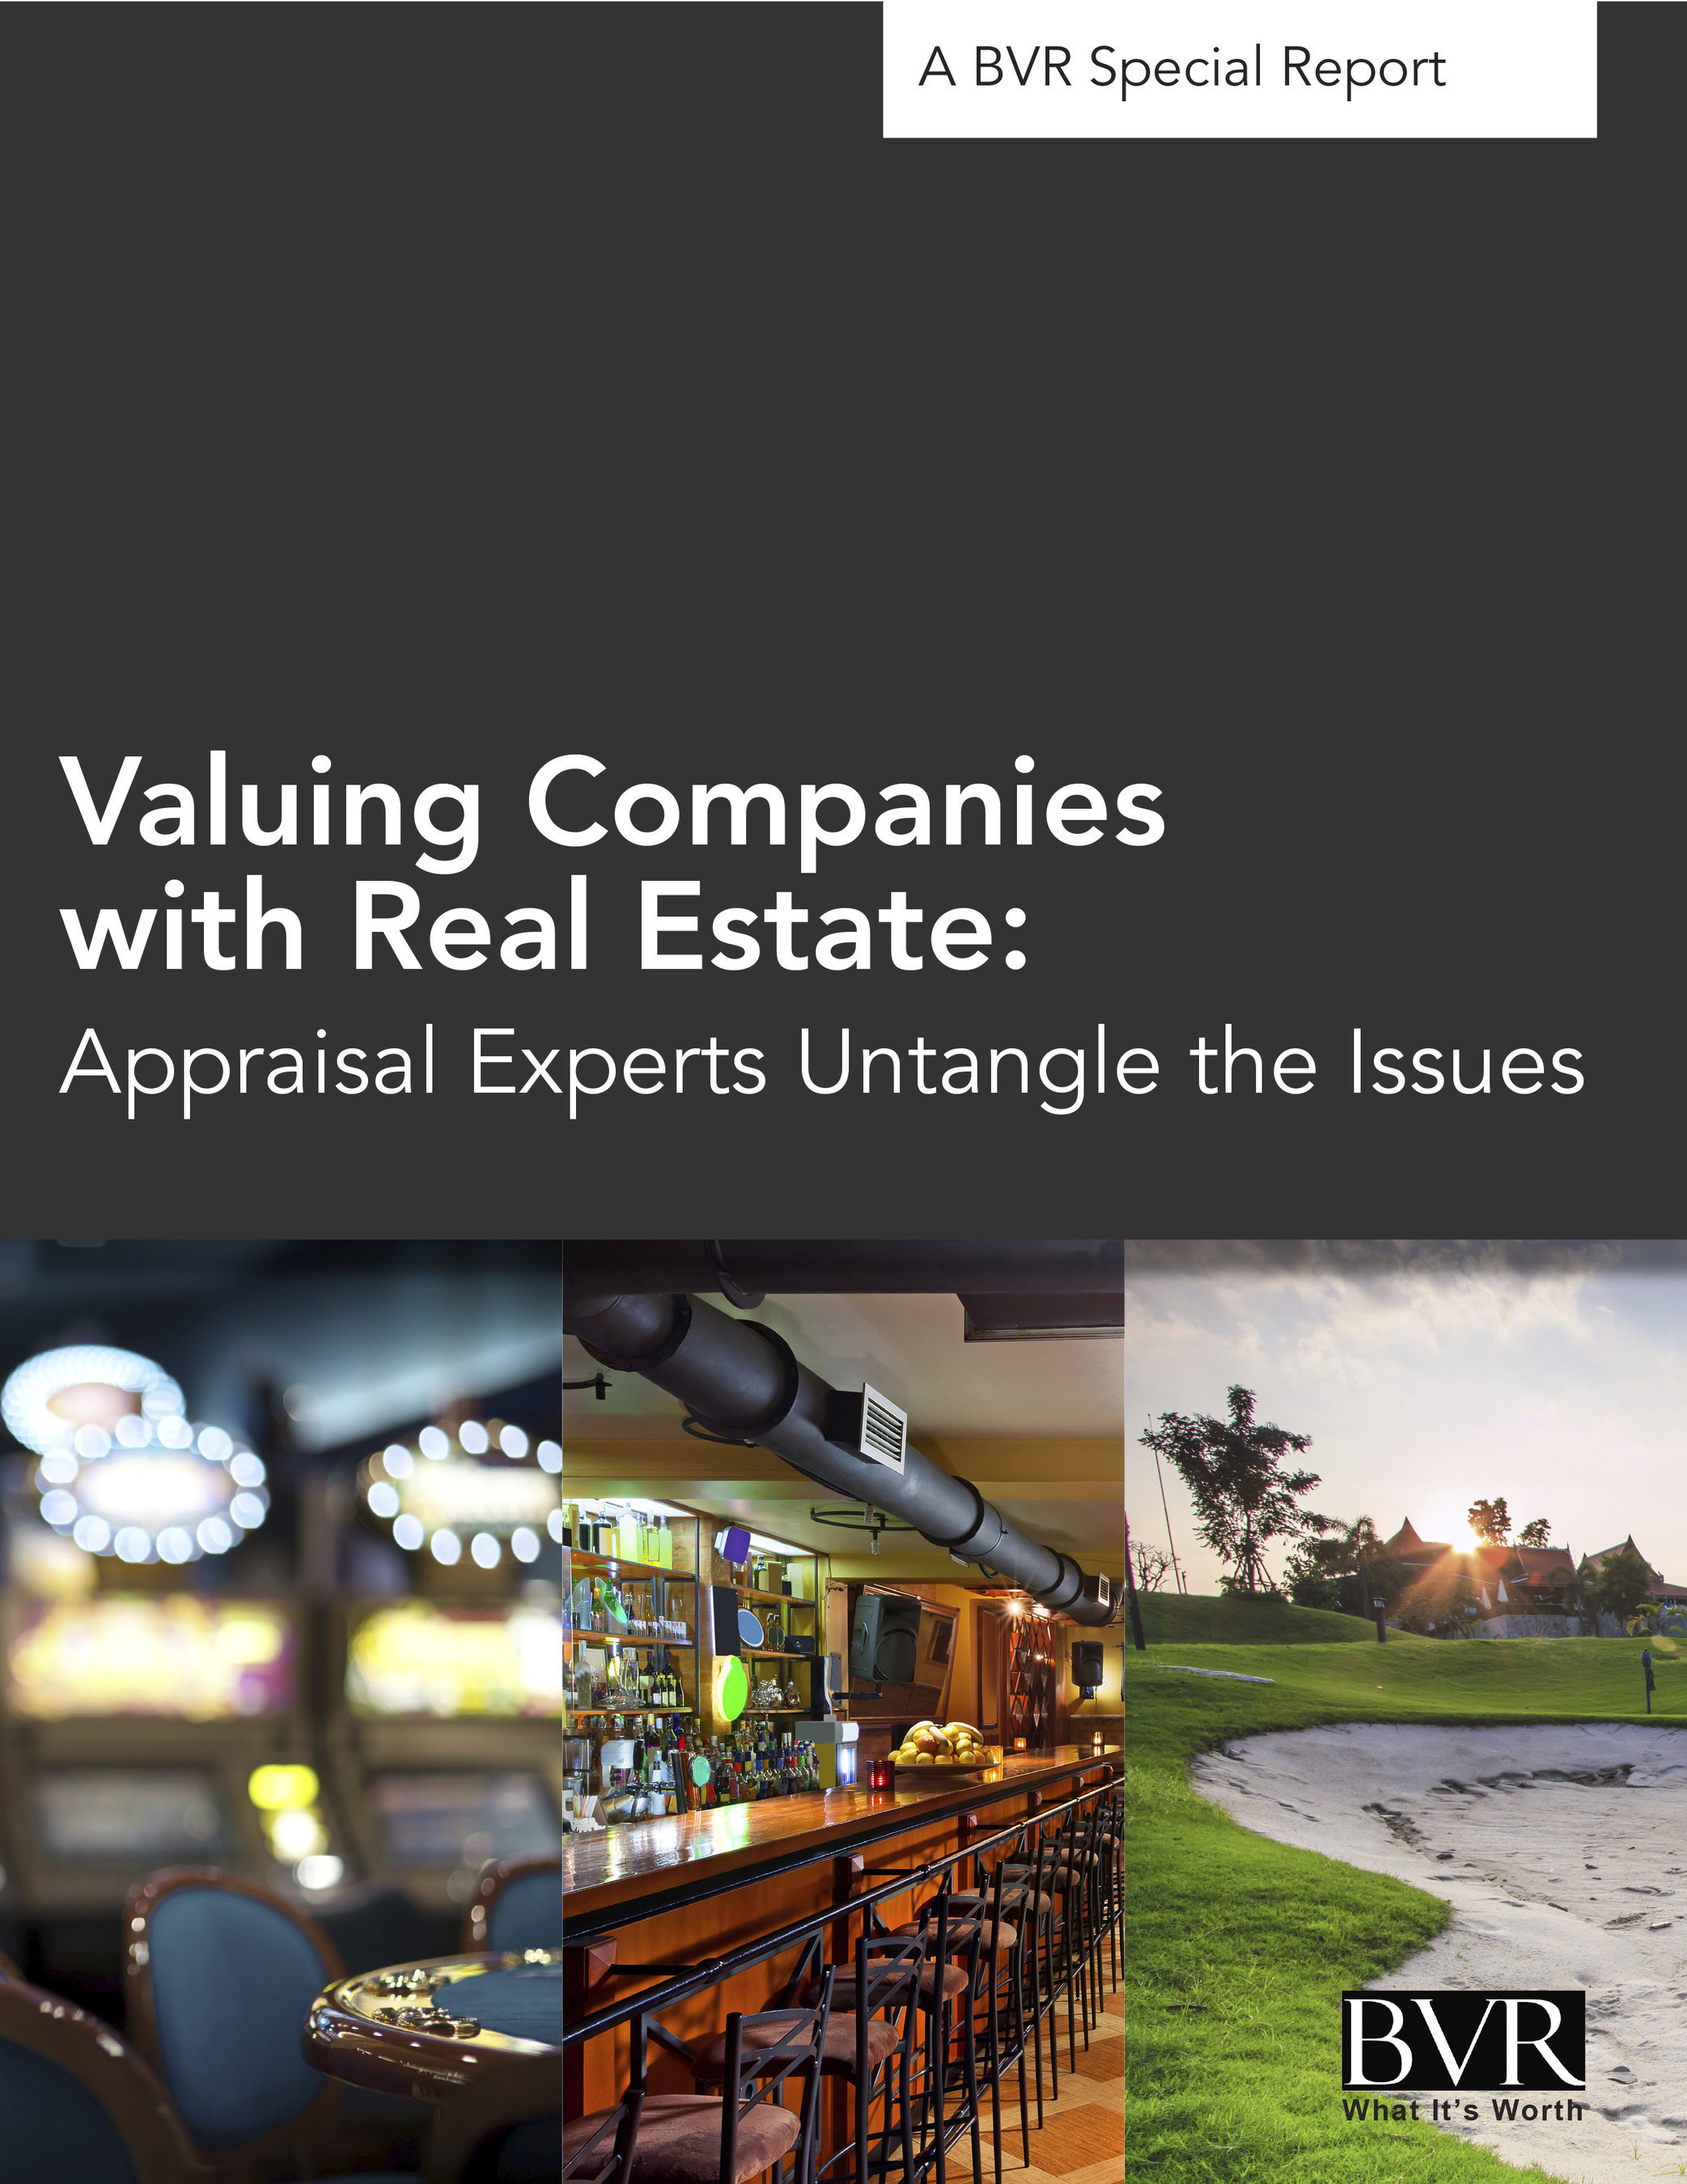 Valuing Companies with Real Estate: Appraisal Experts Untangle the Issues